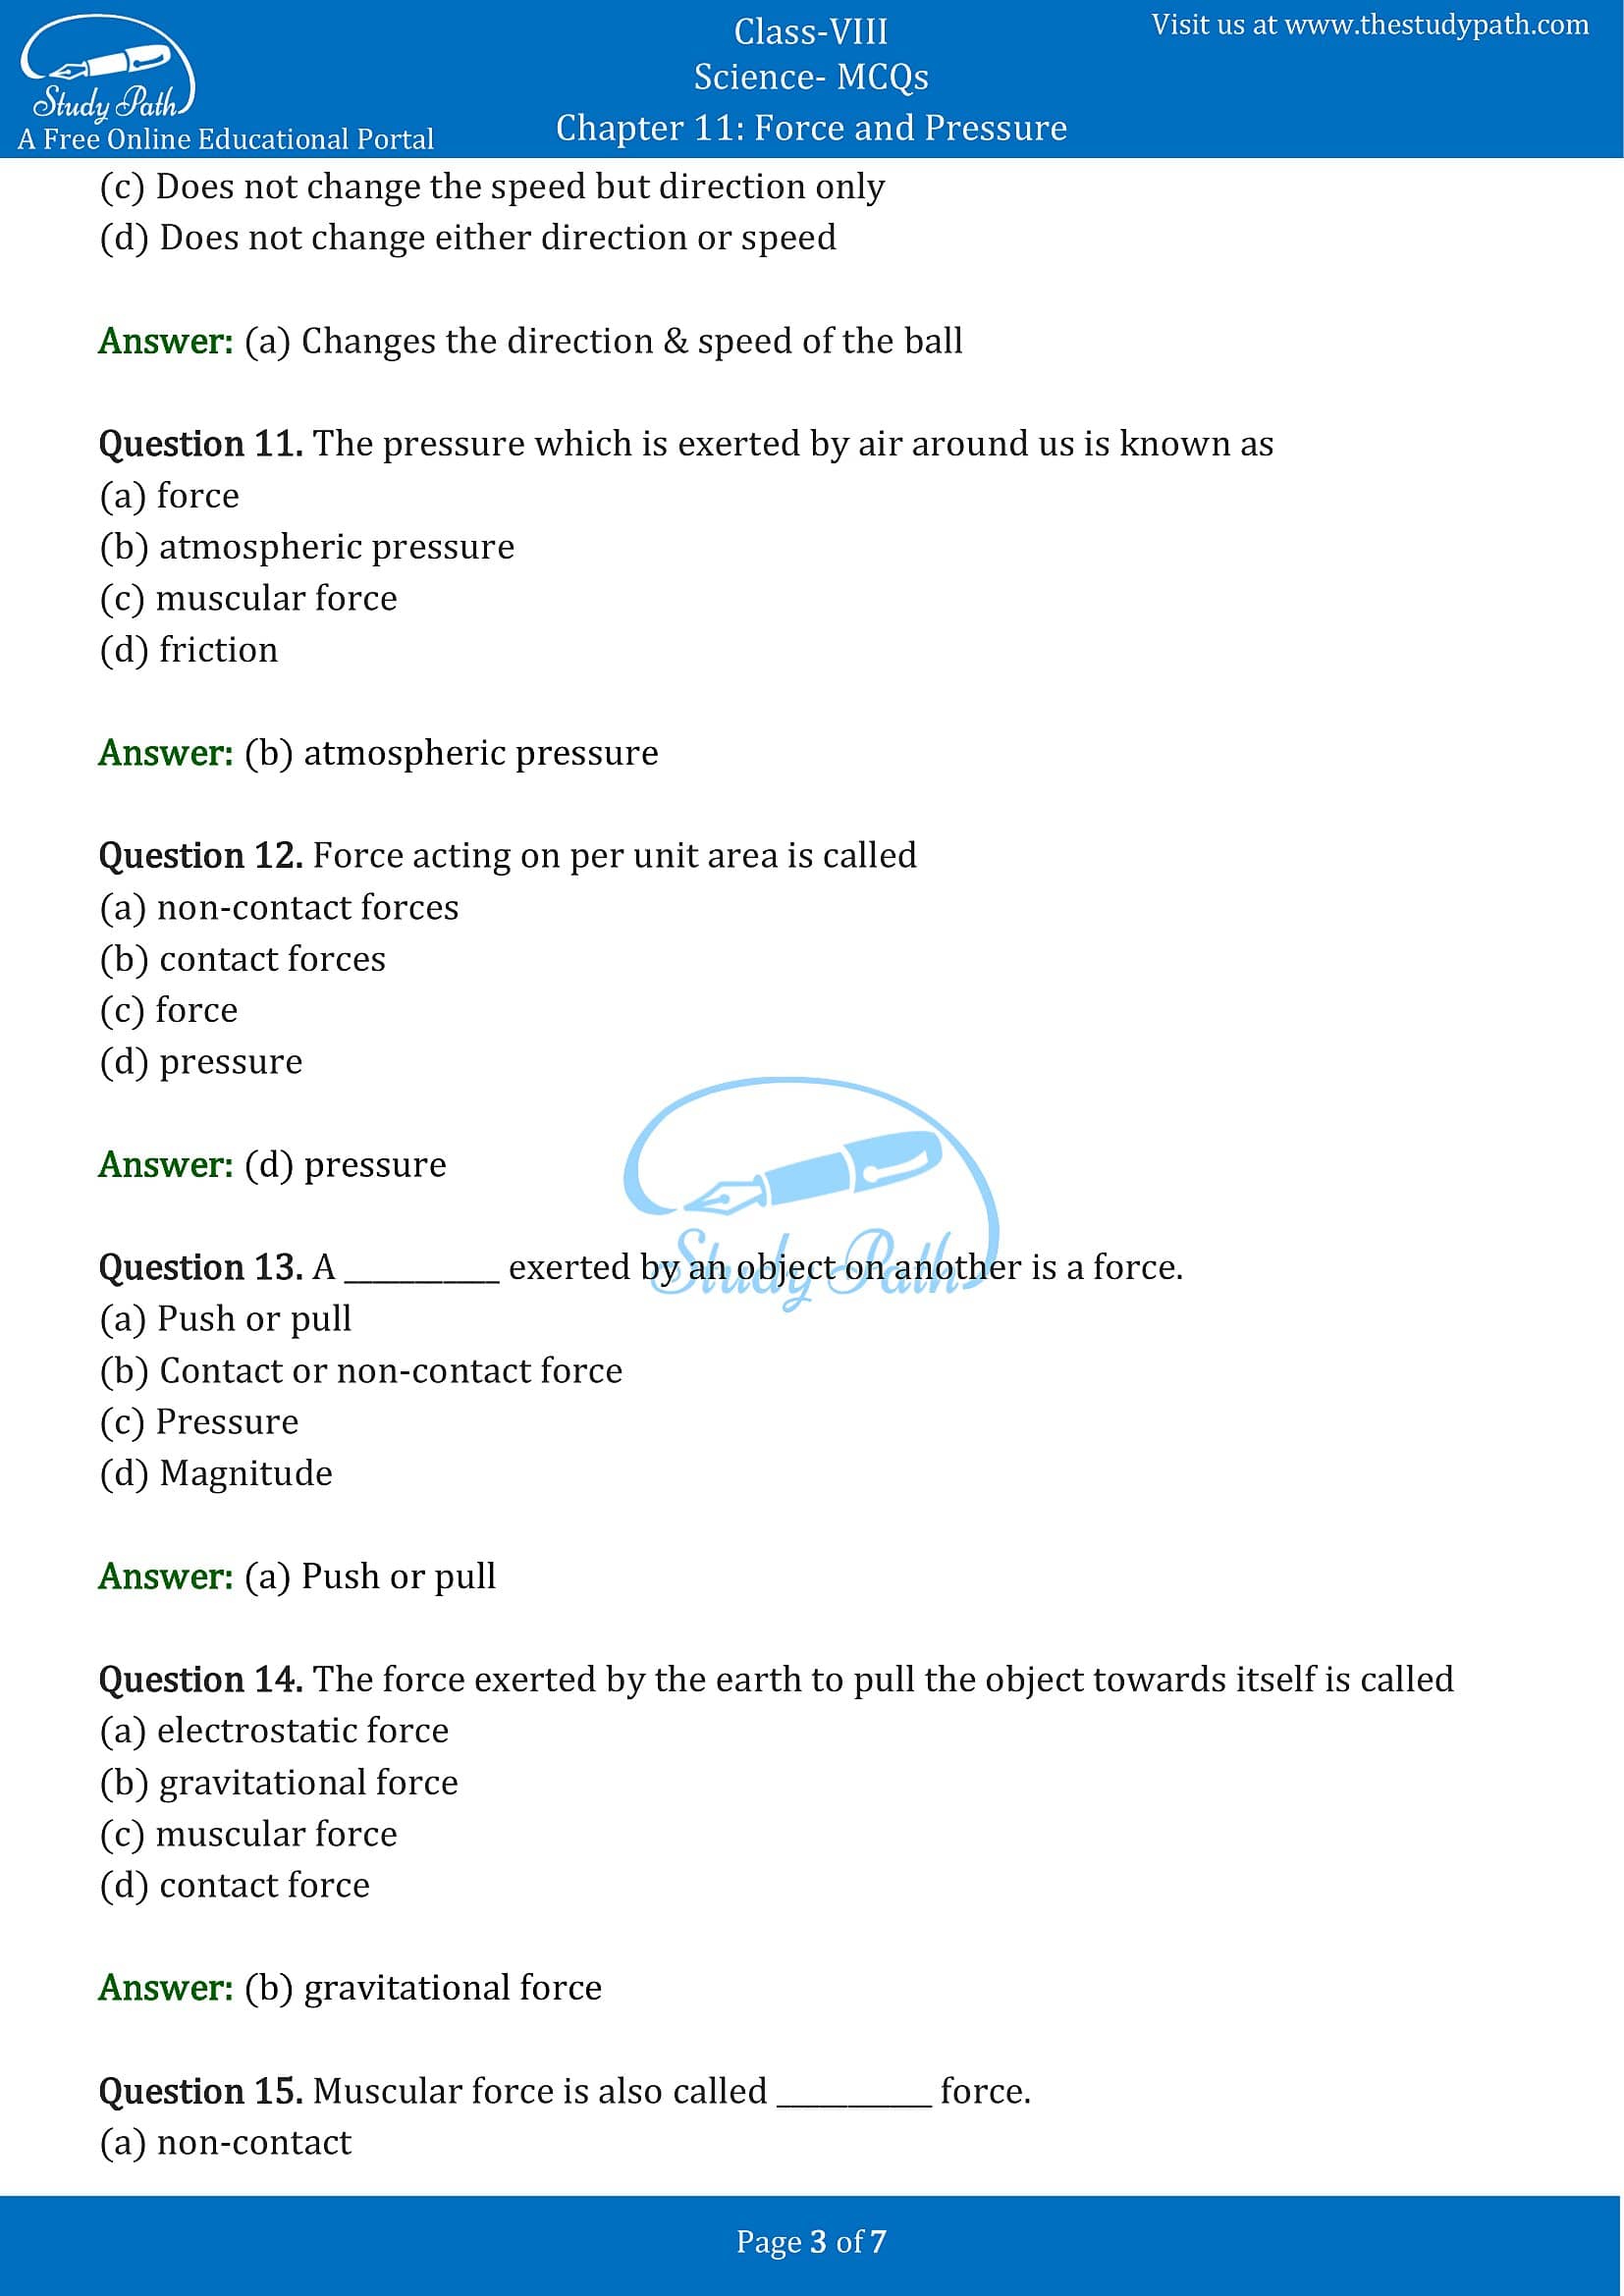 MCQ Questions for Class 8 Science Chapter 11 Force and Pressure with Answers PDF -3